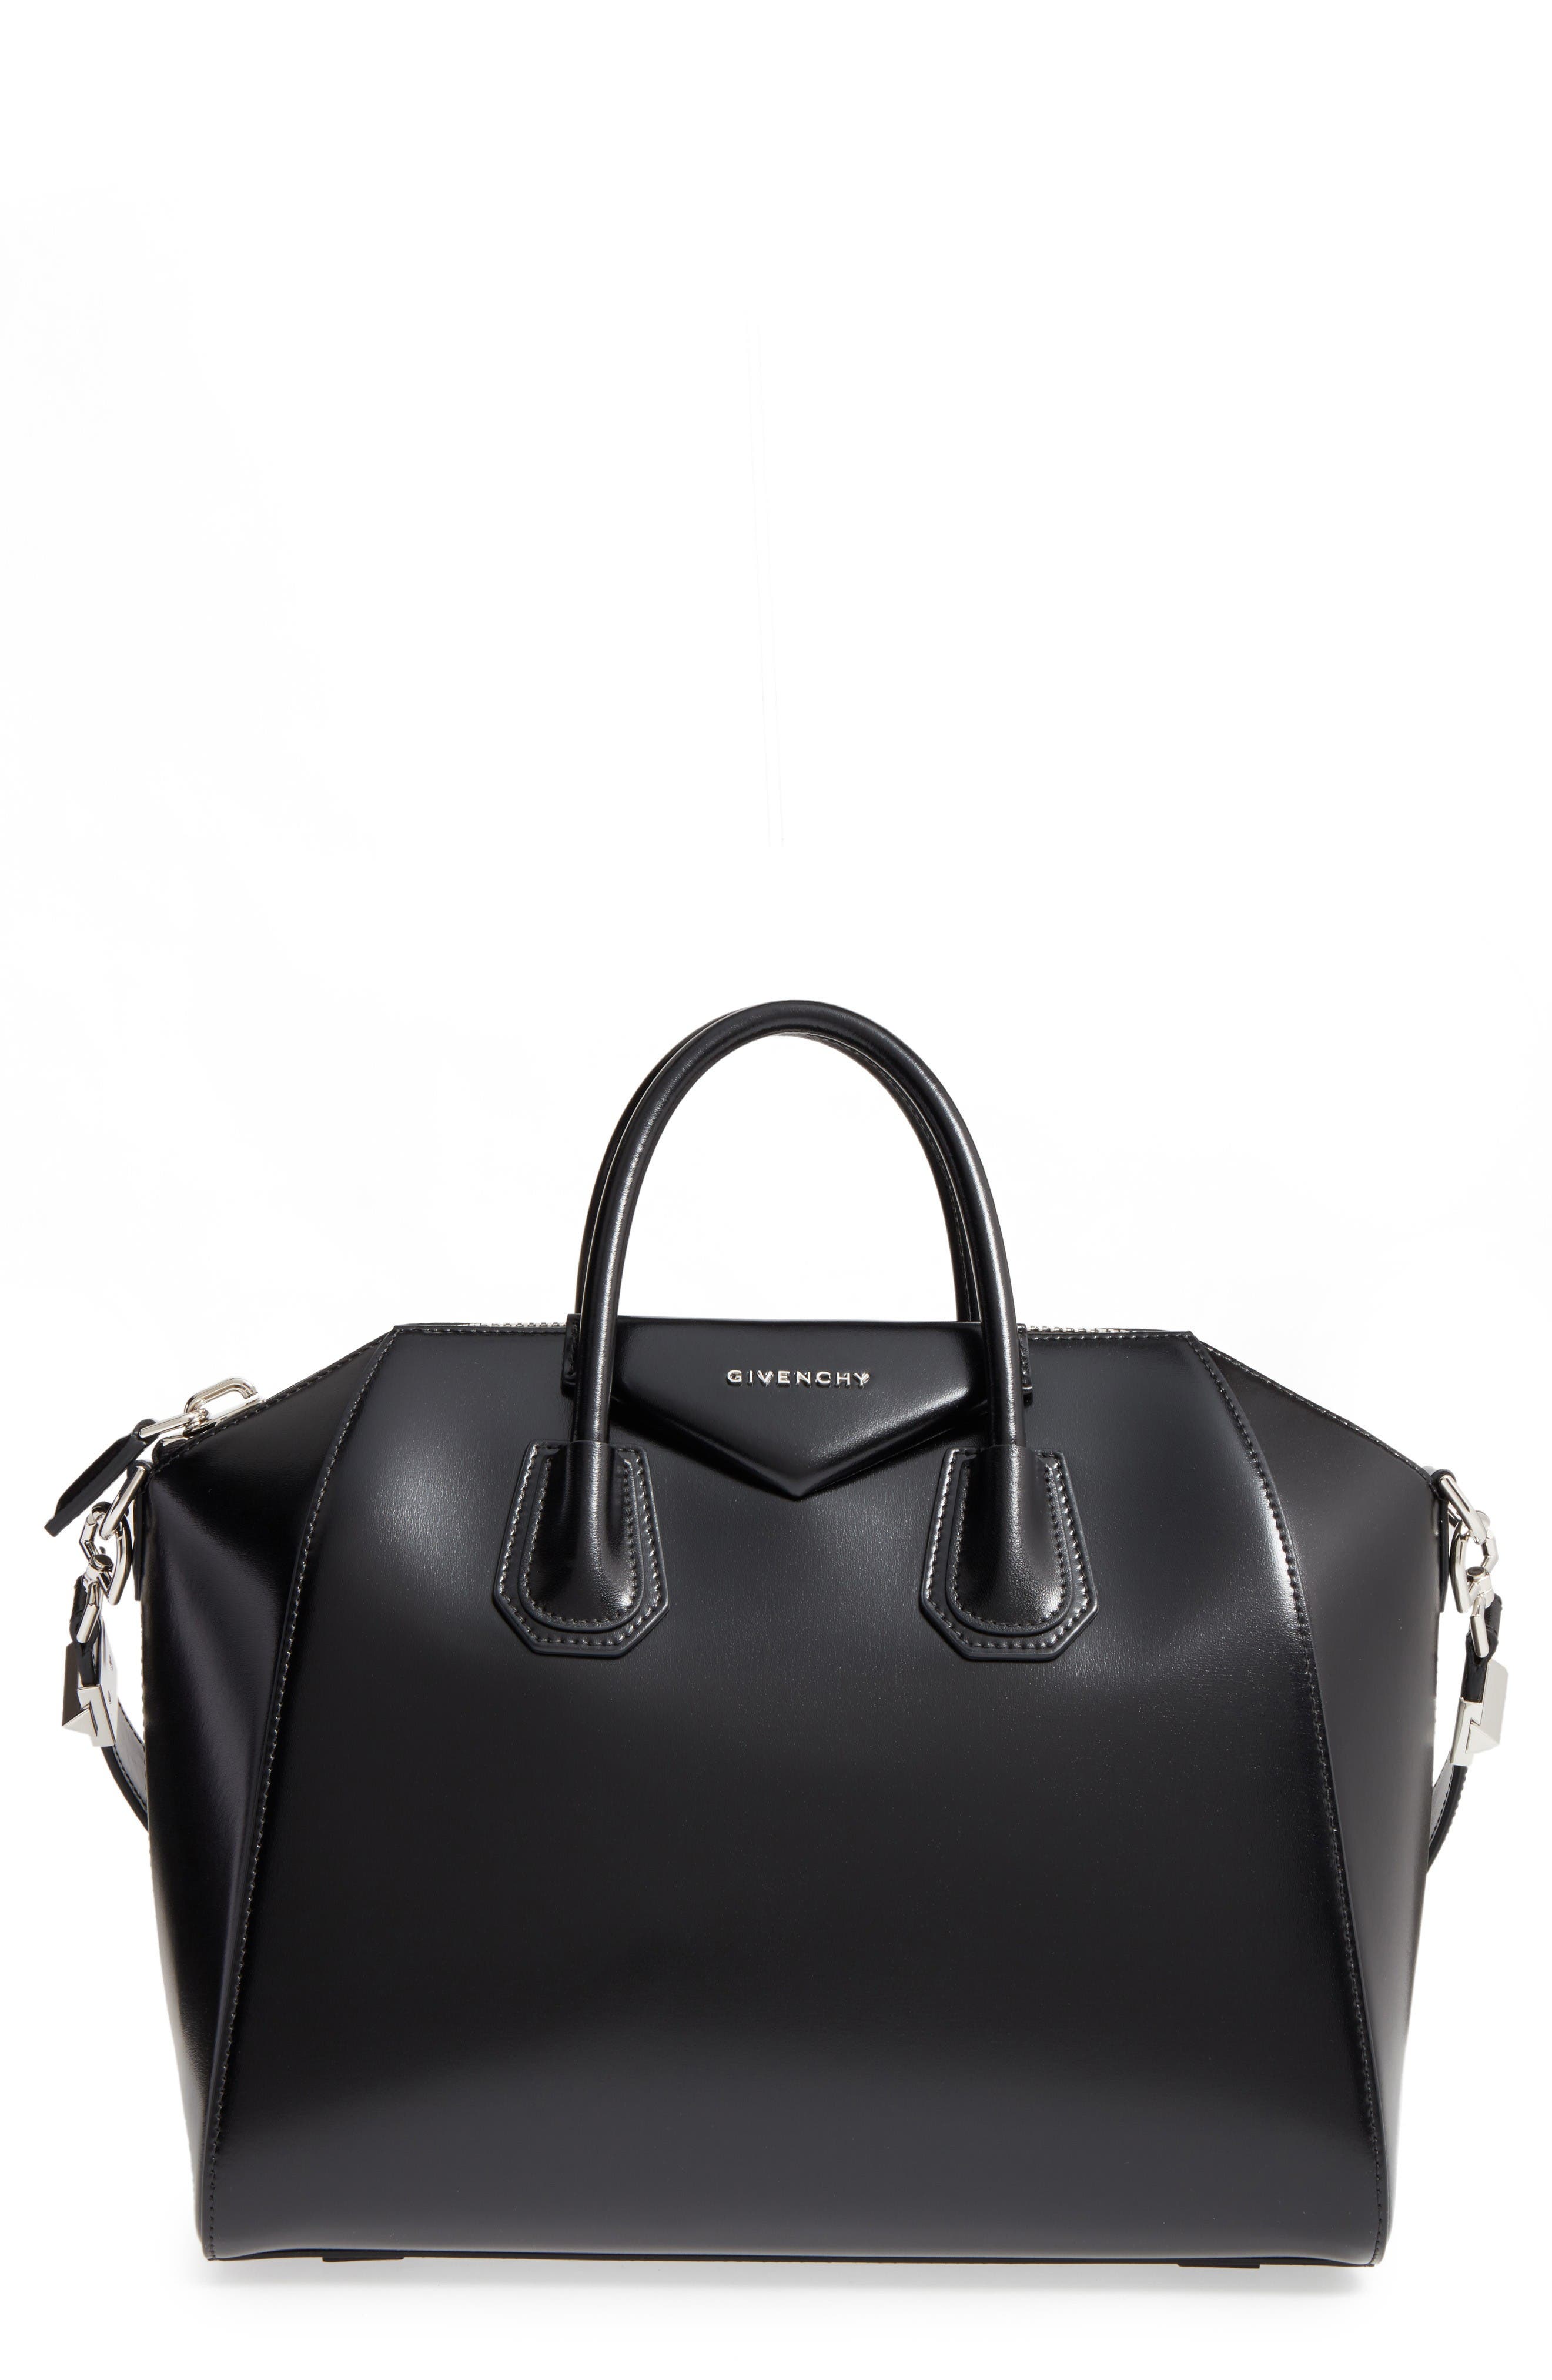 givenchy canada bags